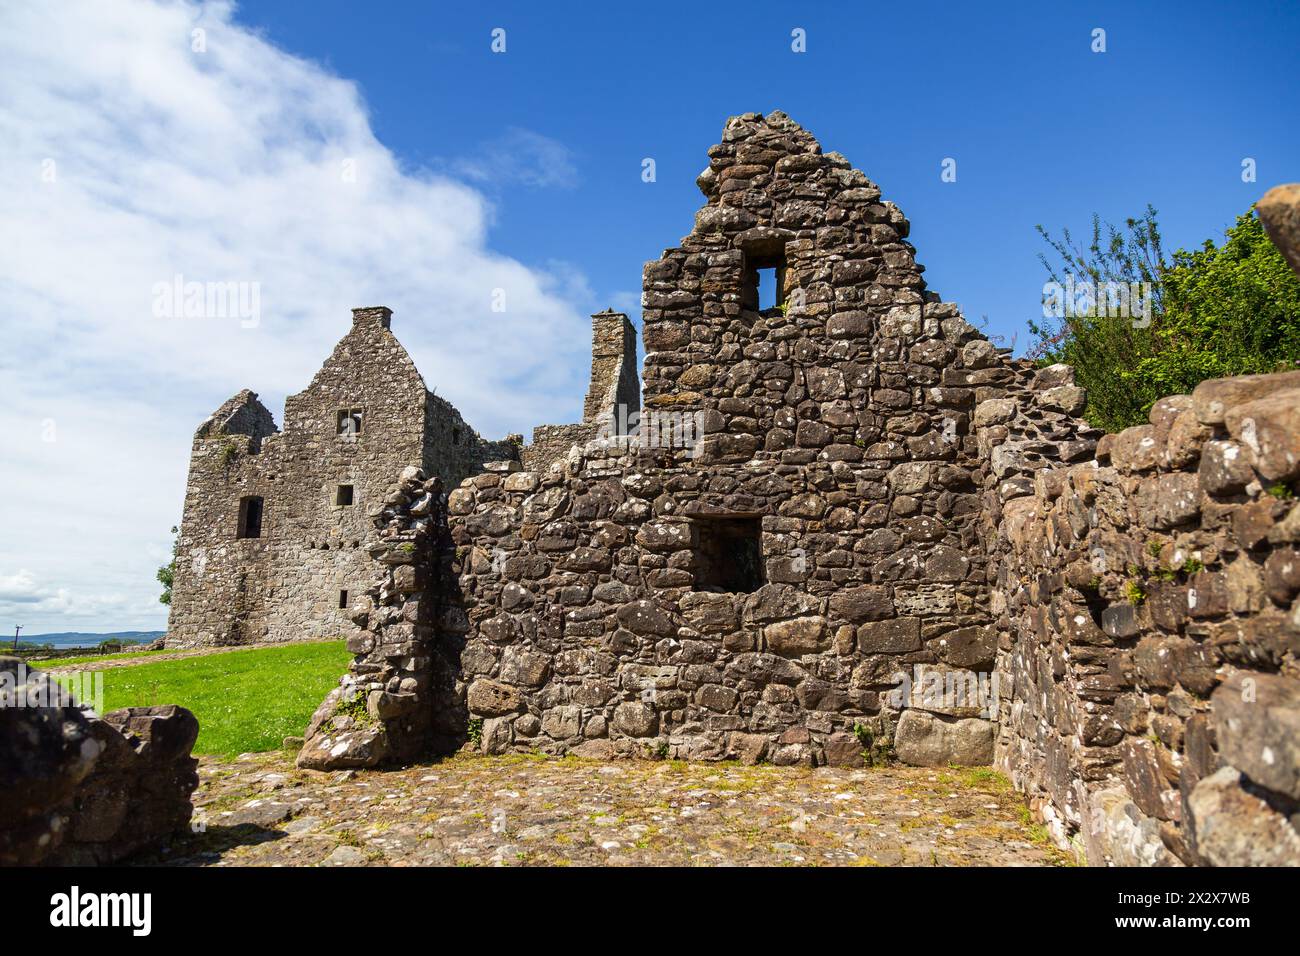 20.07.2019, Tully, Northern Ireland, United Kingdom - Tully Castle ruins, built for Ulster-Scots Sir John Hume 1612-1615 and burnt down in 1641, today Stock Photo